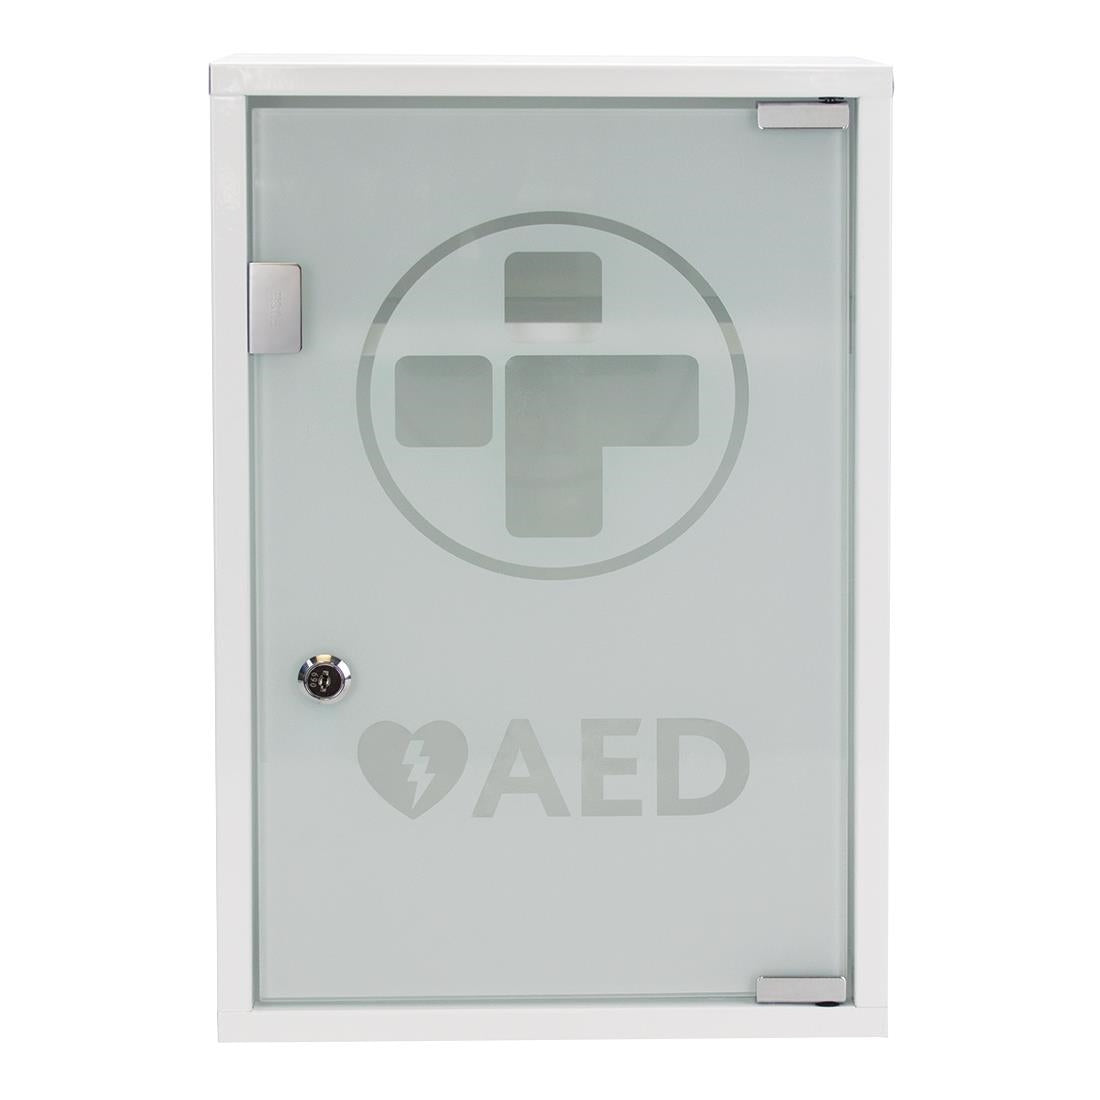 CH787 Automated External Defibrillator Alarmed Metal Cabinet JD Catering Equipment Solutions Ltd